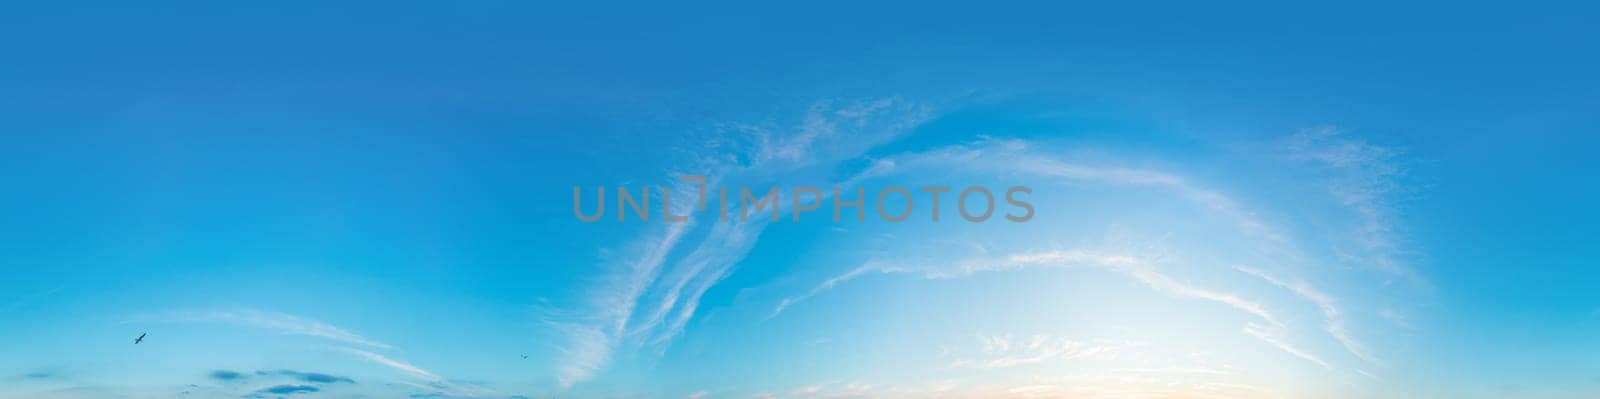 Sunset sky panorama with bright glowing pink Cirrus clouds. HDR 360 seamless spherical panorama. Full zenith or sky dome for 3D visualization, sky replacement for aerial drone panoramas. by Matiunina